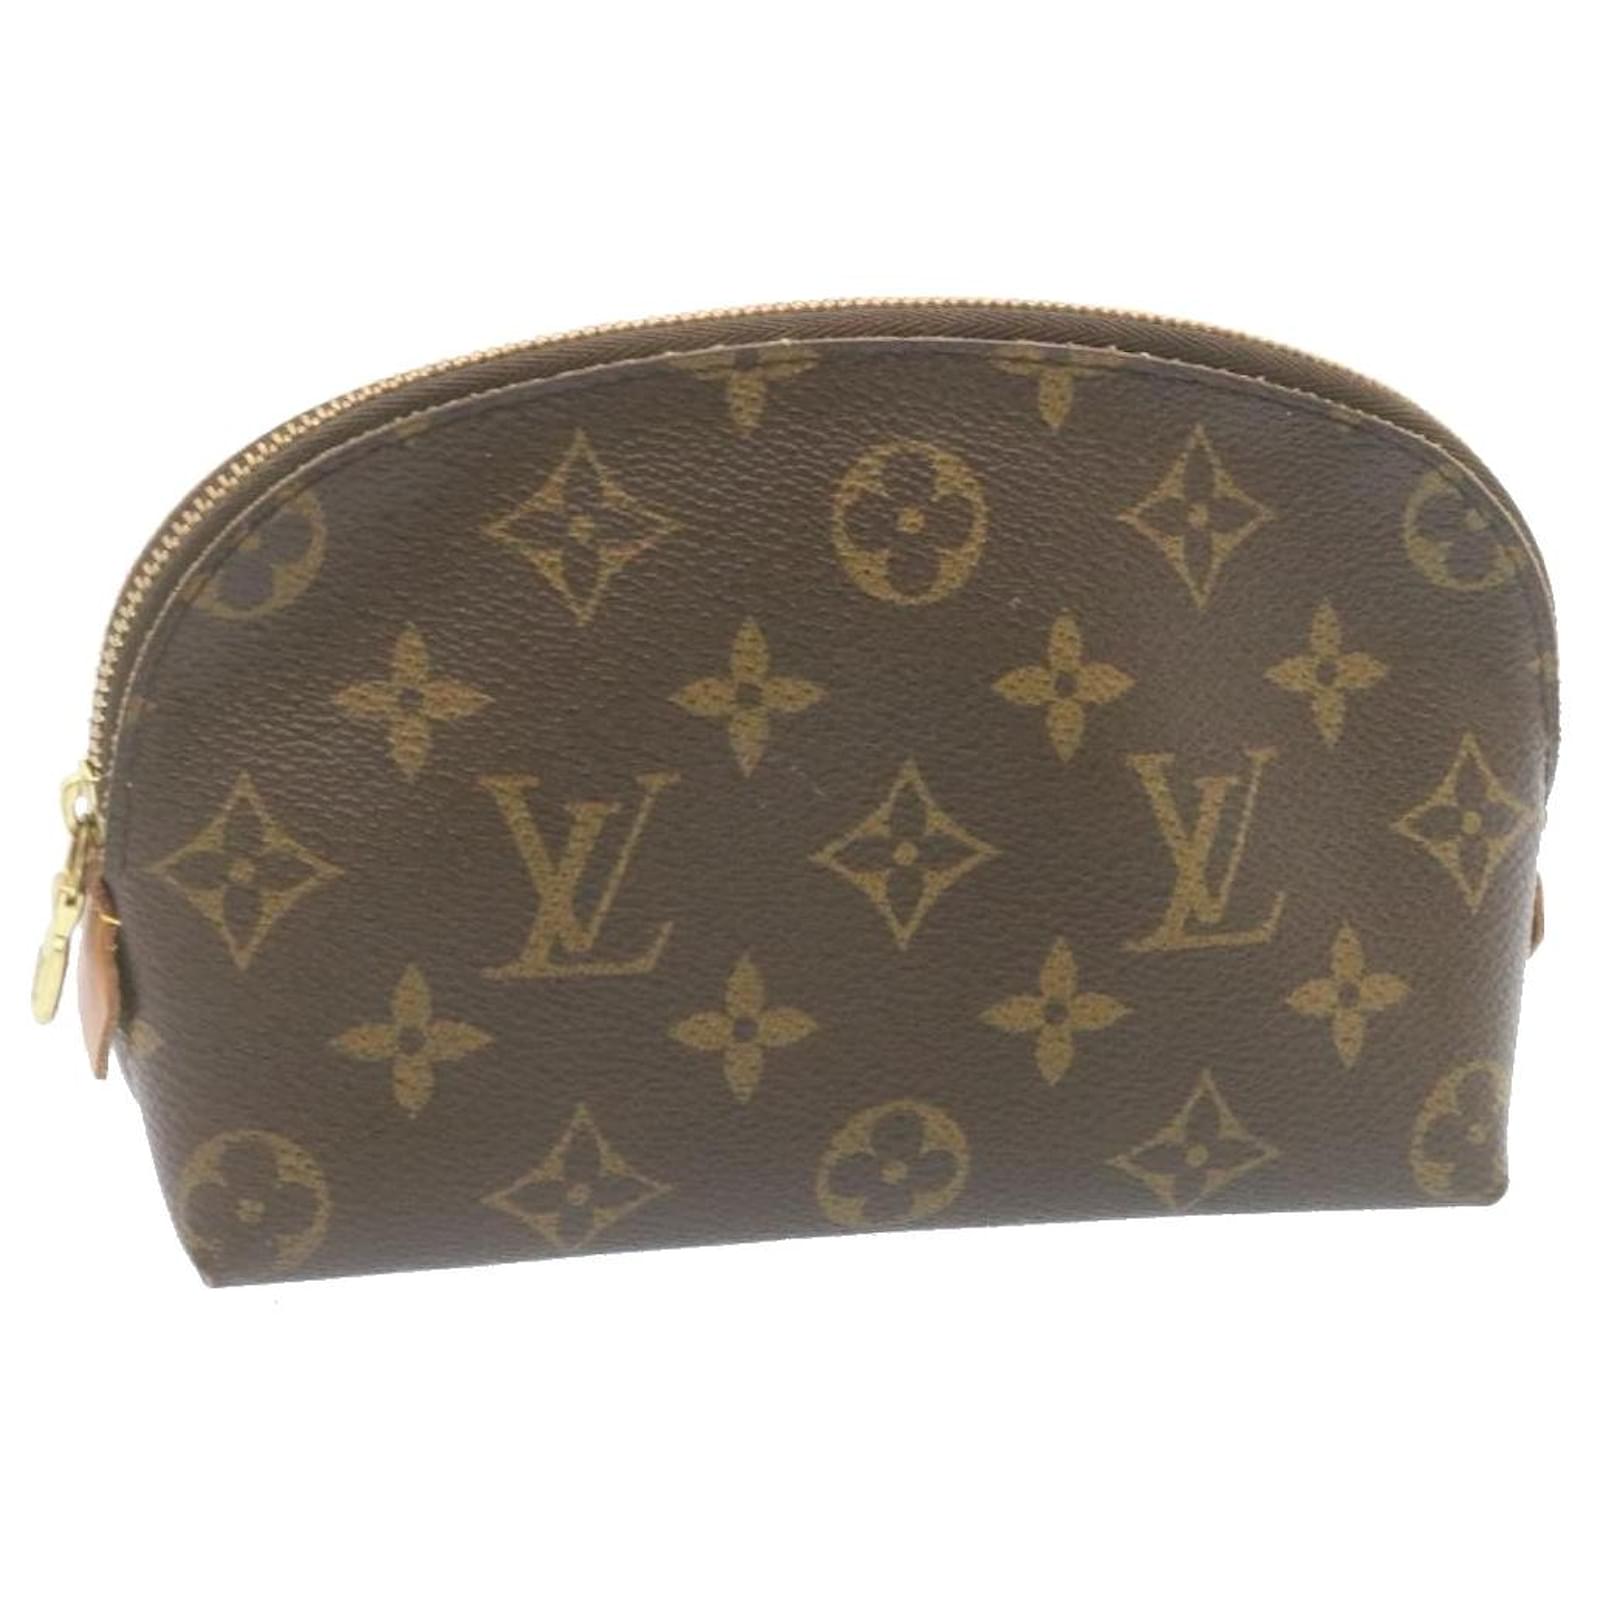 Cosmetic PM Pouch - Louis Vuitton